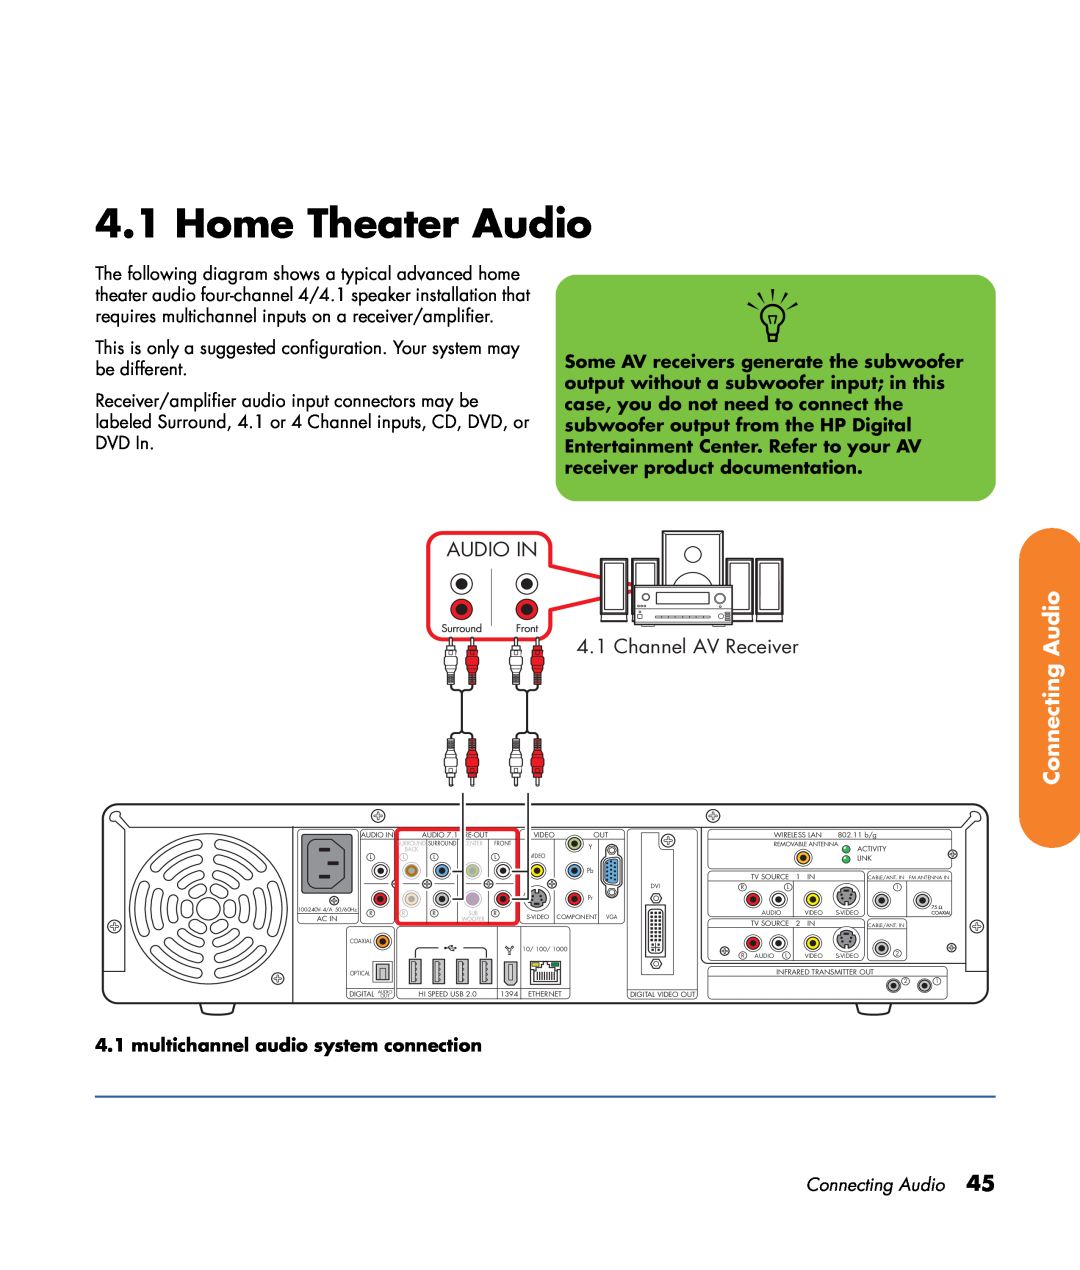 HP z555, z557 Home Theater Audio, Connecting Audio, AUDIO IN 4.1 Channel AV Receiver, multichannel audio system connection 